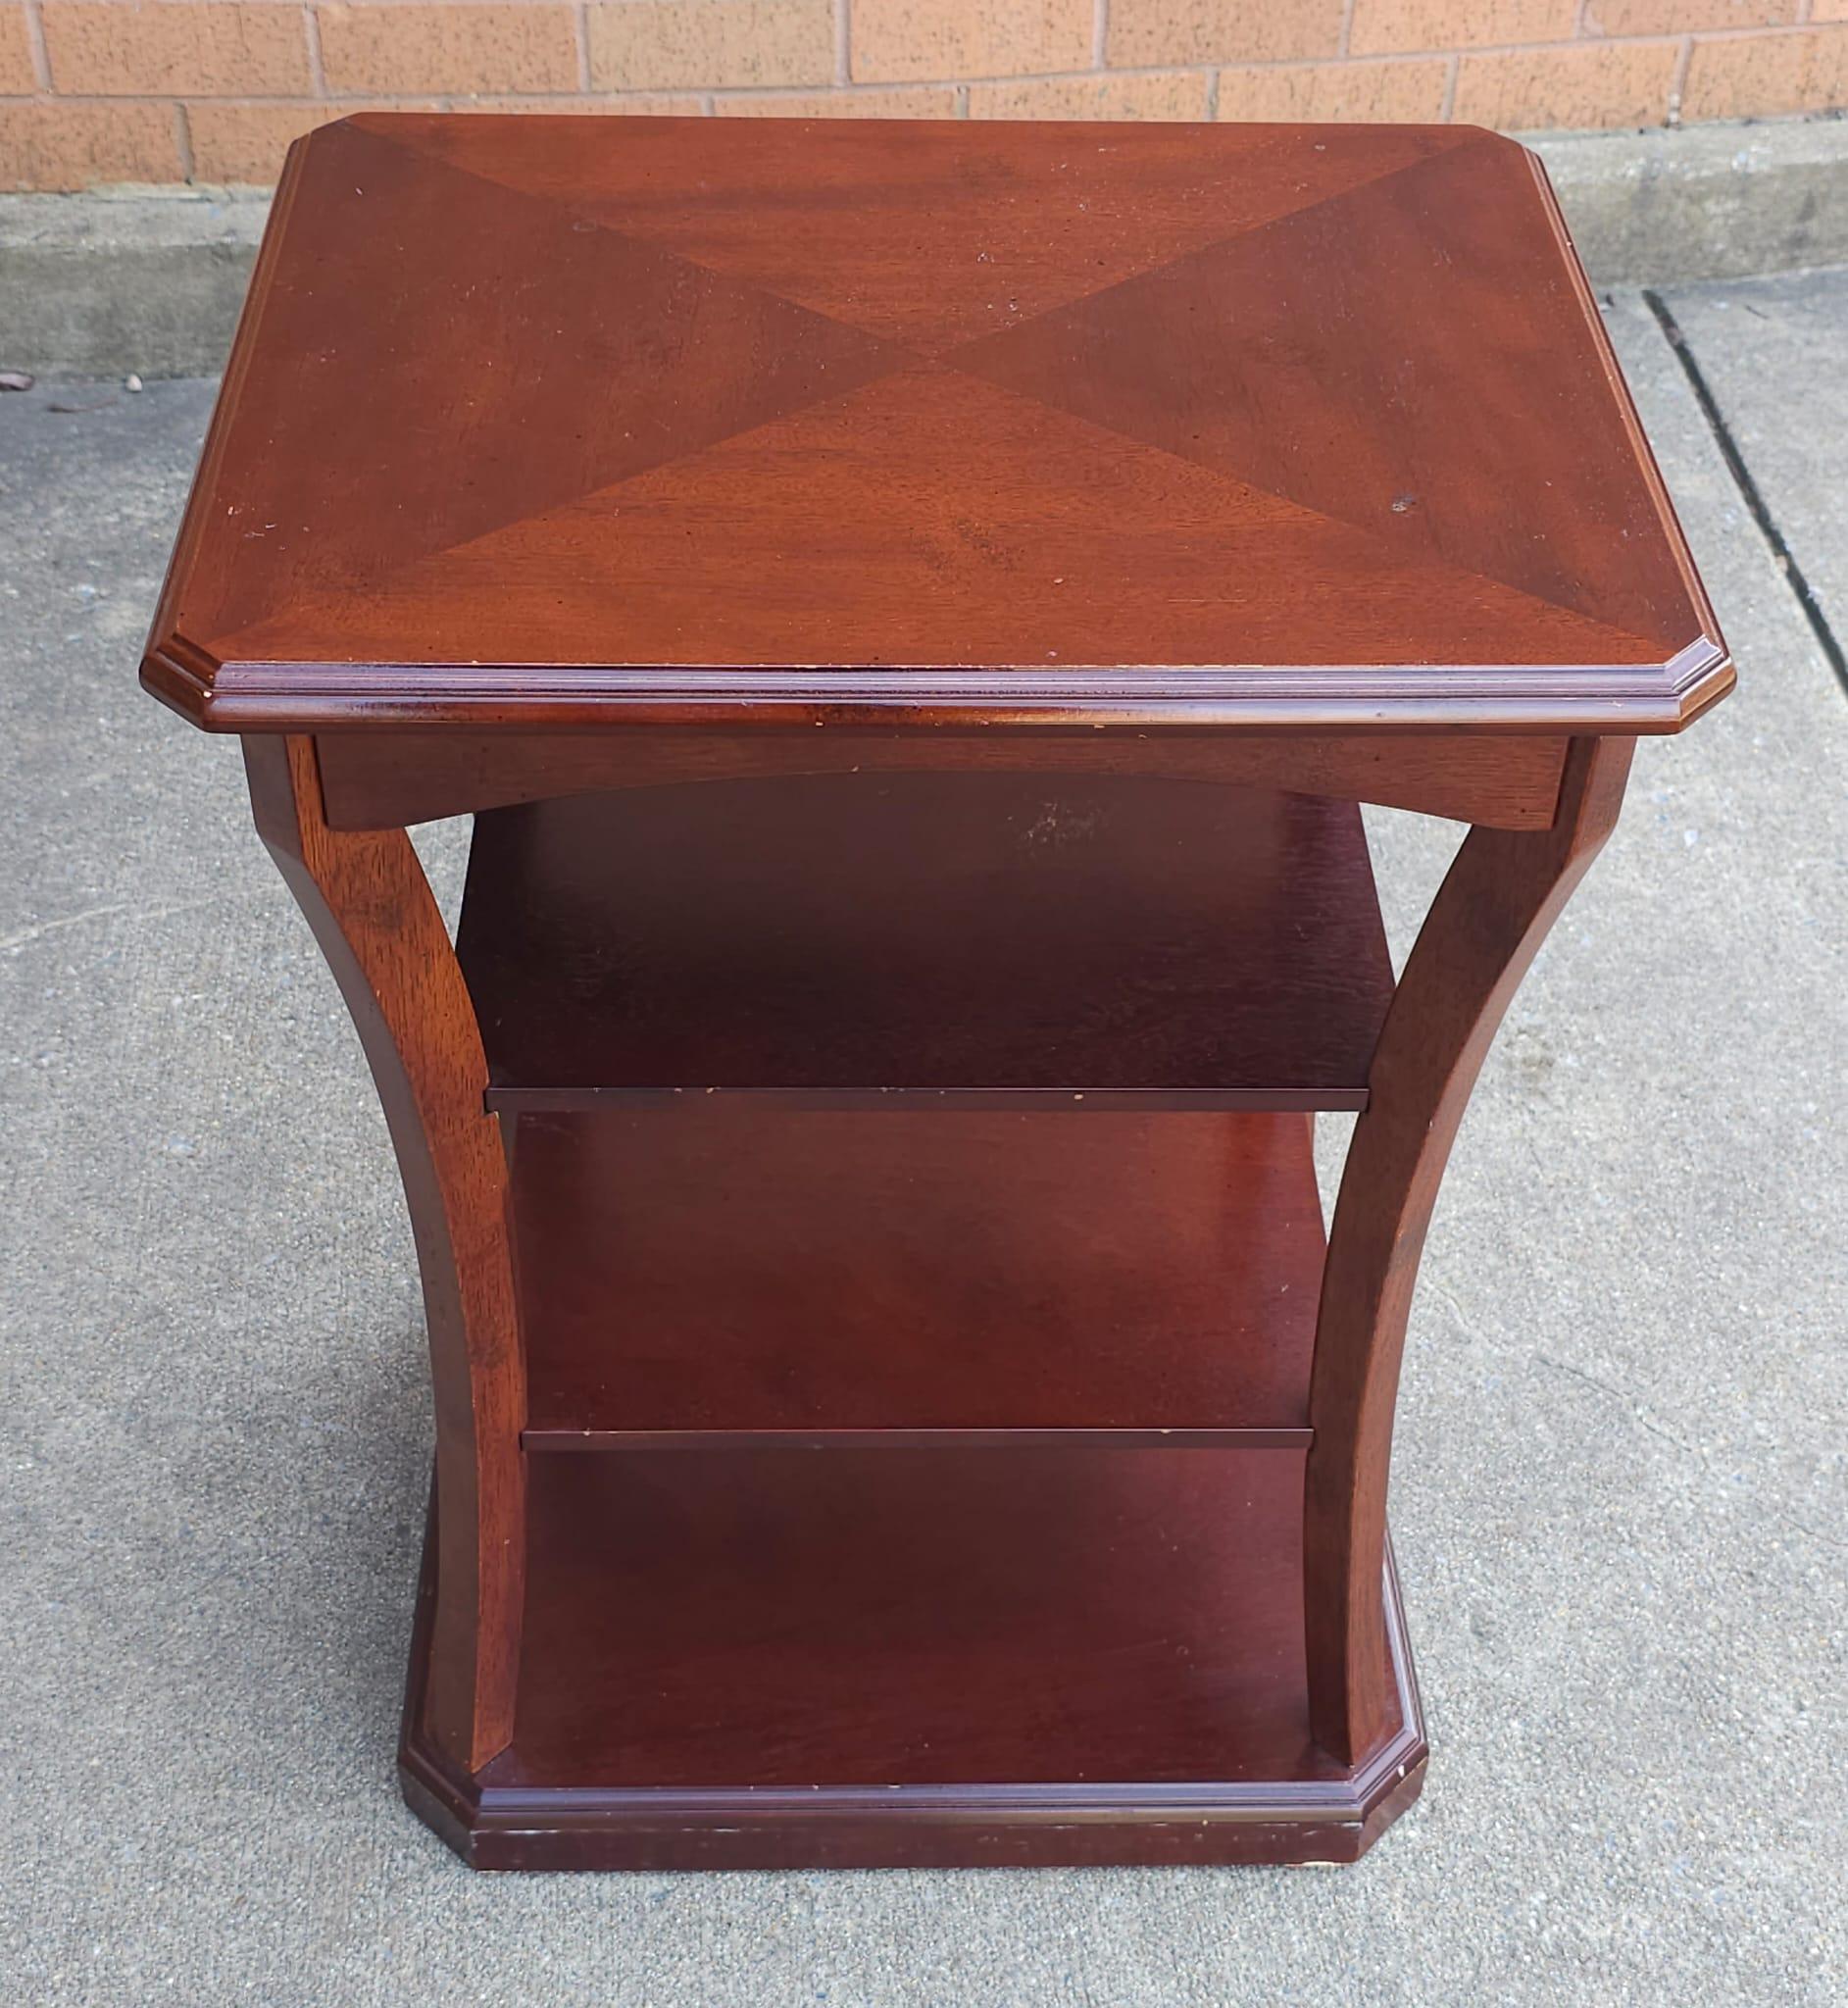 Late 20th Century Federal Style Four-Tier Mahohany Bookmatched Top Side Table in great vintage condition. Measures 20